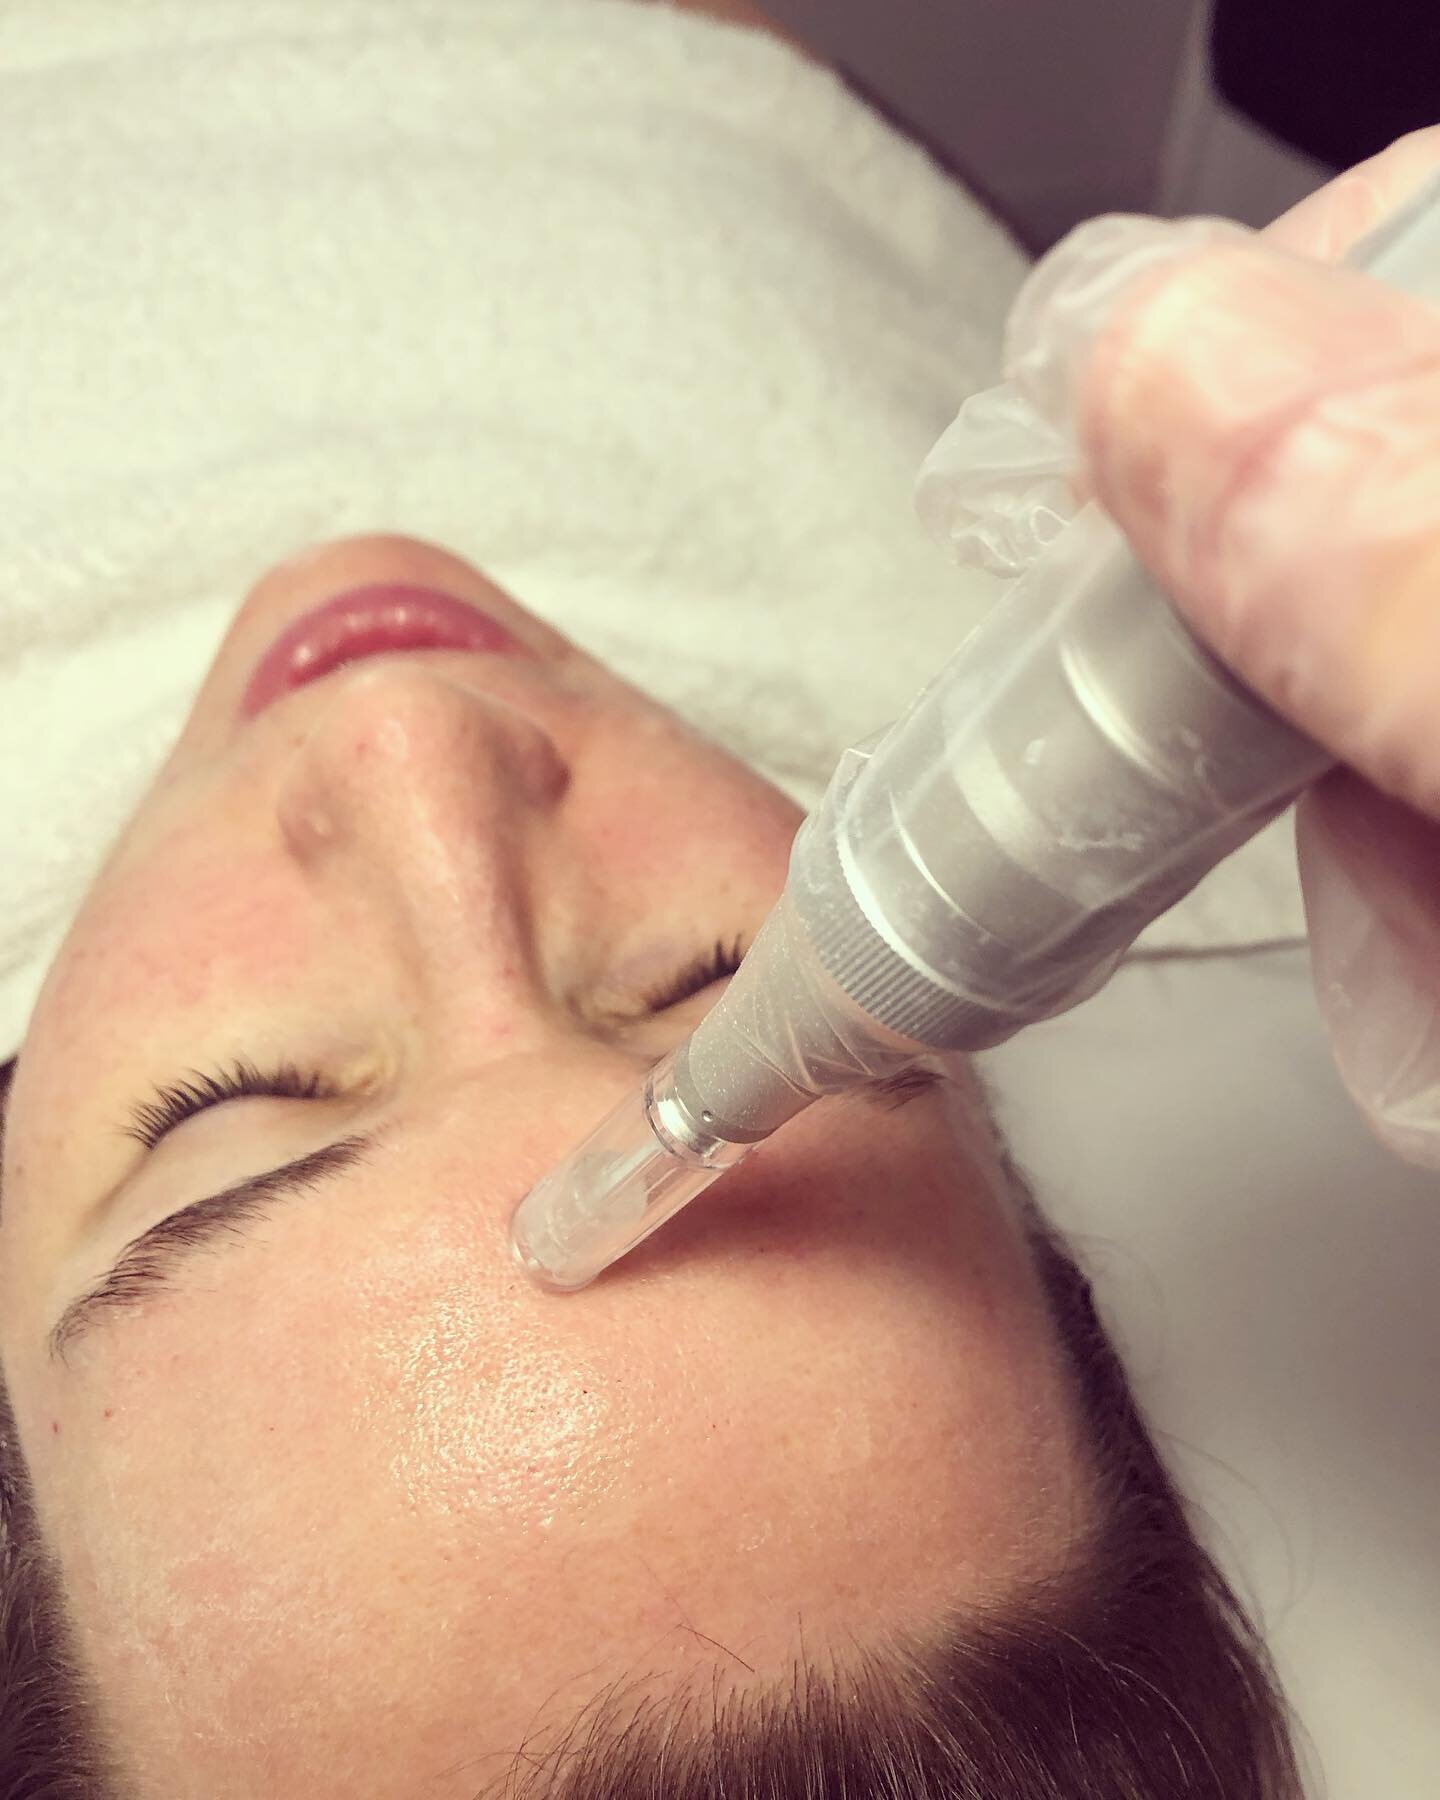 Microneedling evens out imperfections and will tighten skin!!
Try it for $249 from $340.  Purchase before March 22nd but use anytime!  #twodayspecial #tightskin #glowingskin